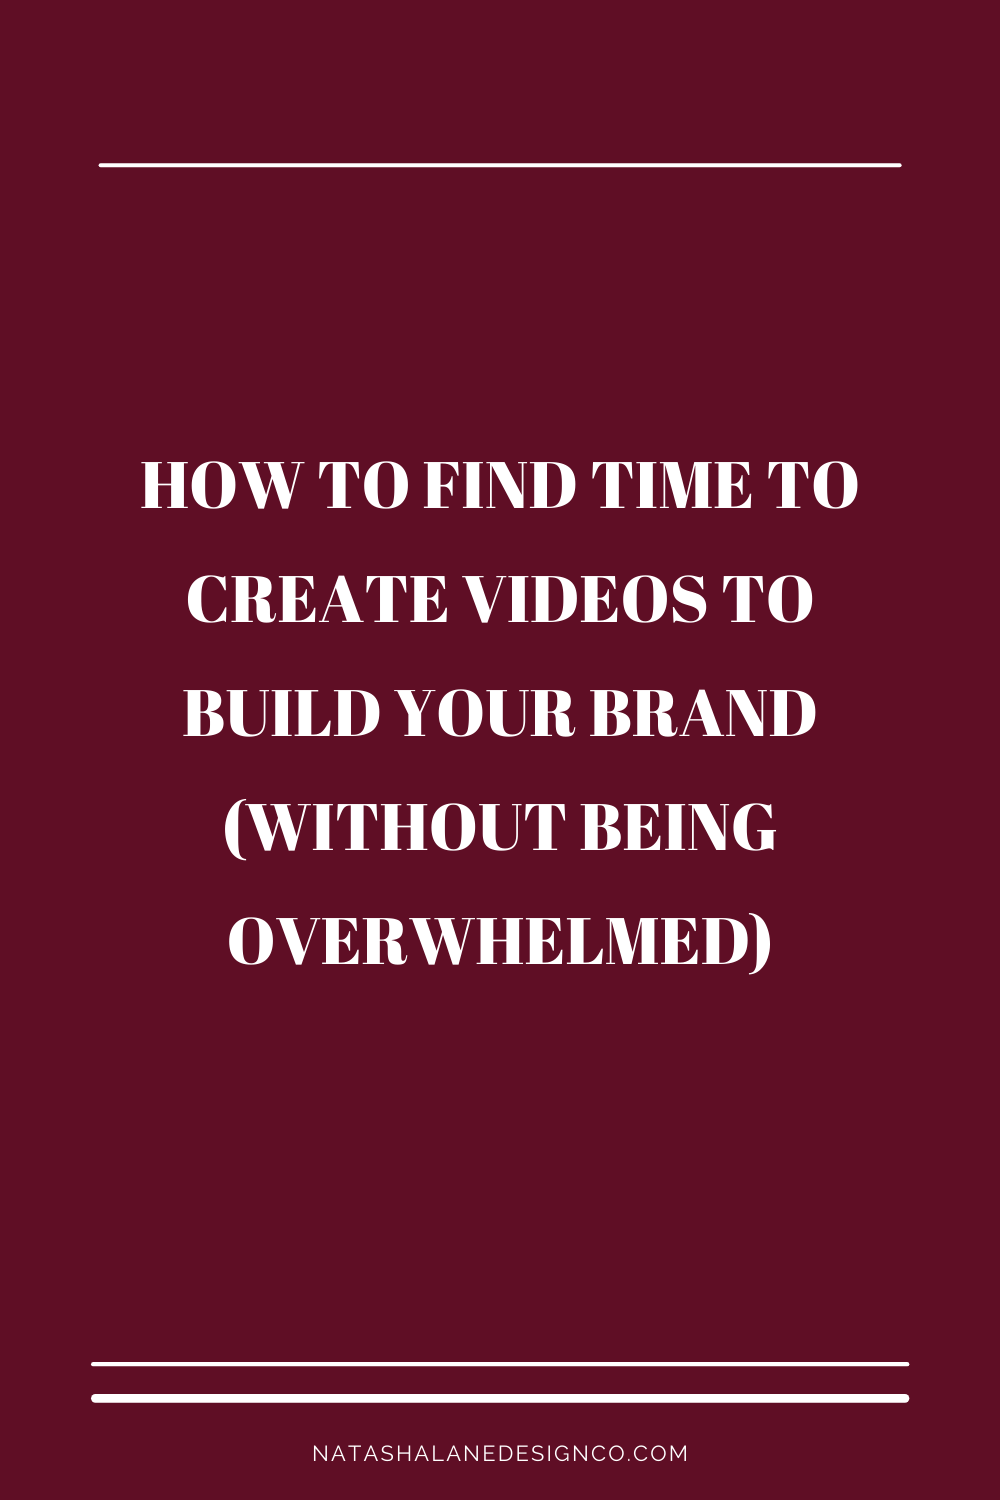 How to find time to create videos to build your brand